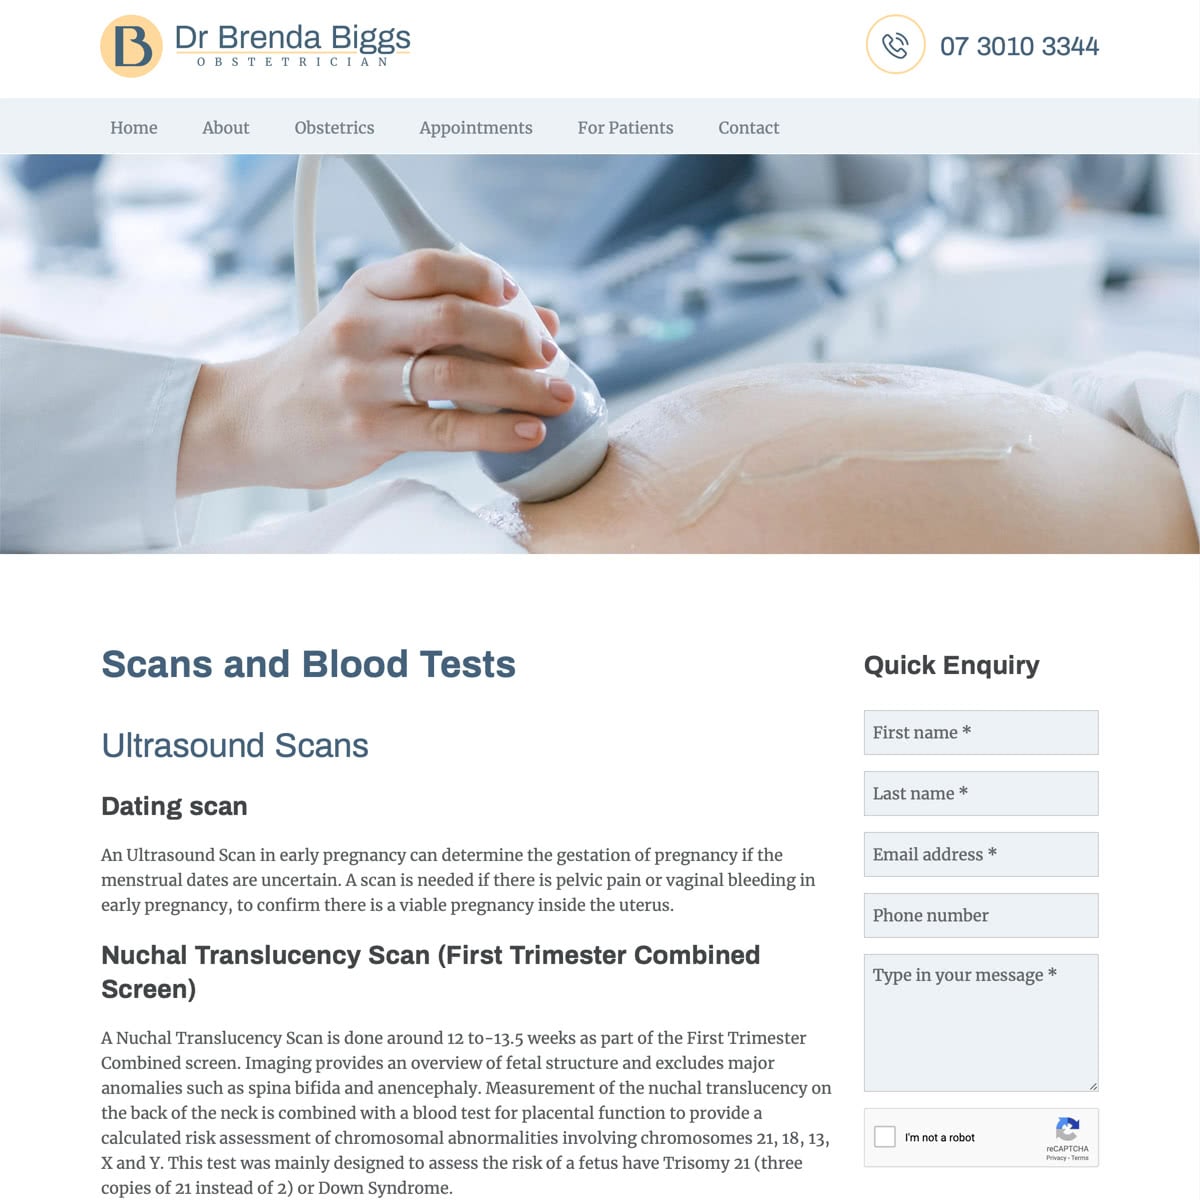 Dr Brenda Biggs - Scans and Blood Tests